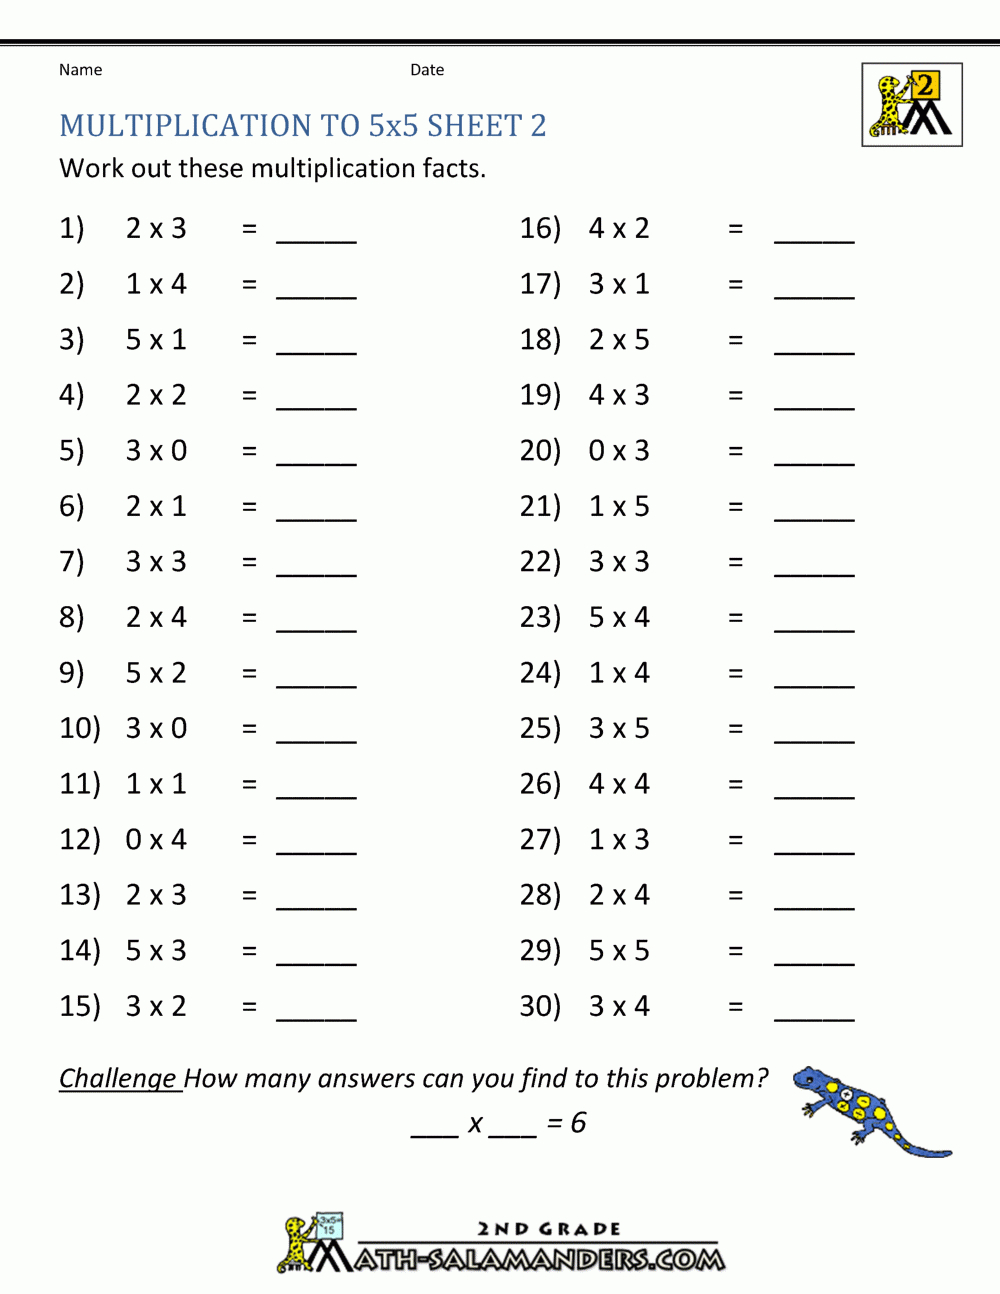 Multiplication Practice Worksheets To 5X5 regarding Printable Multiplication Facts Worksheets